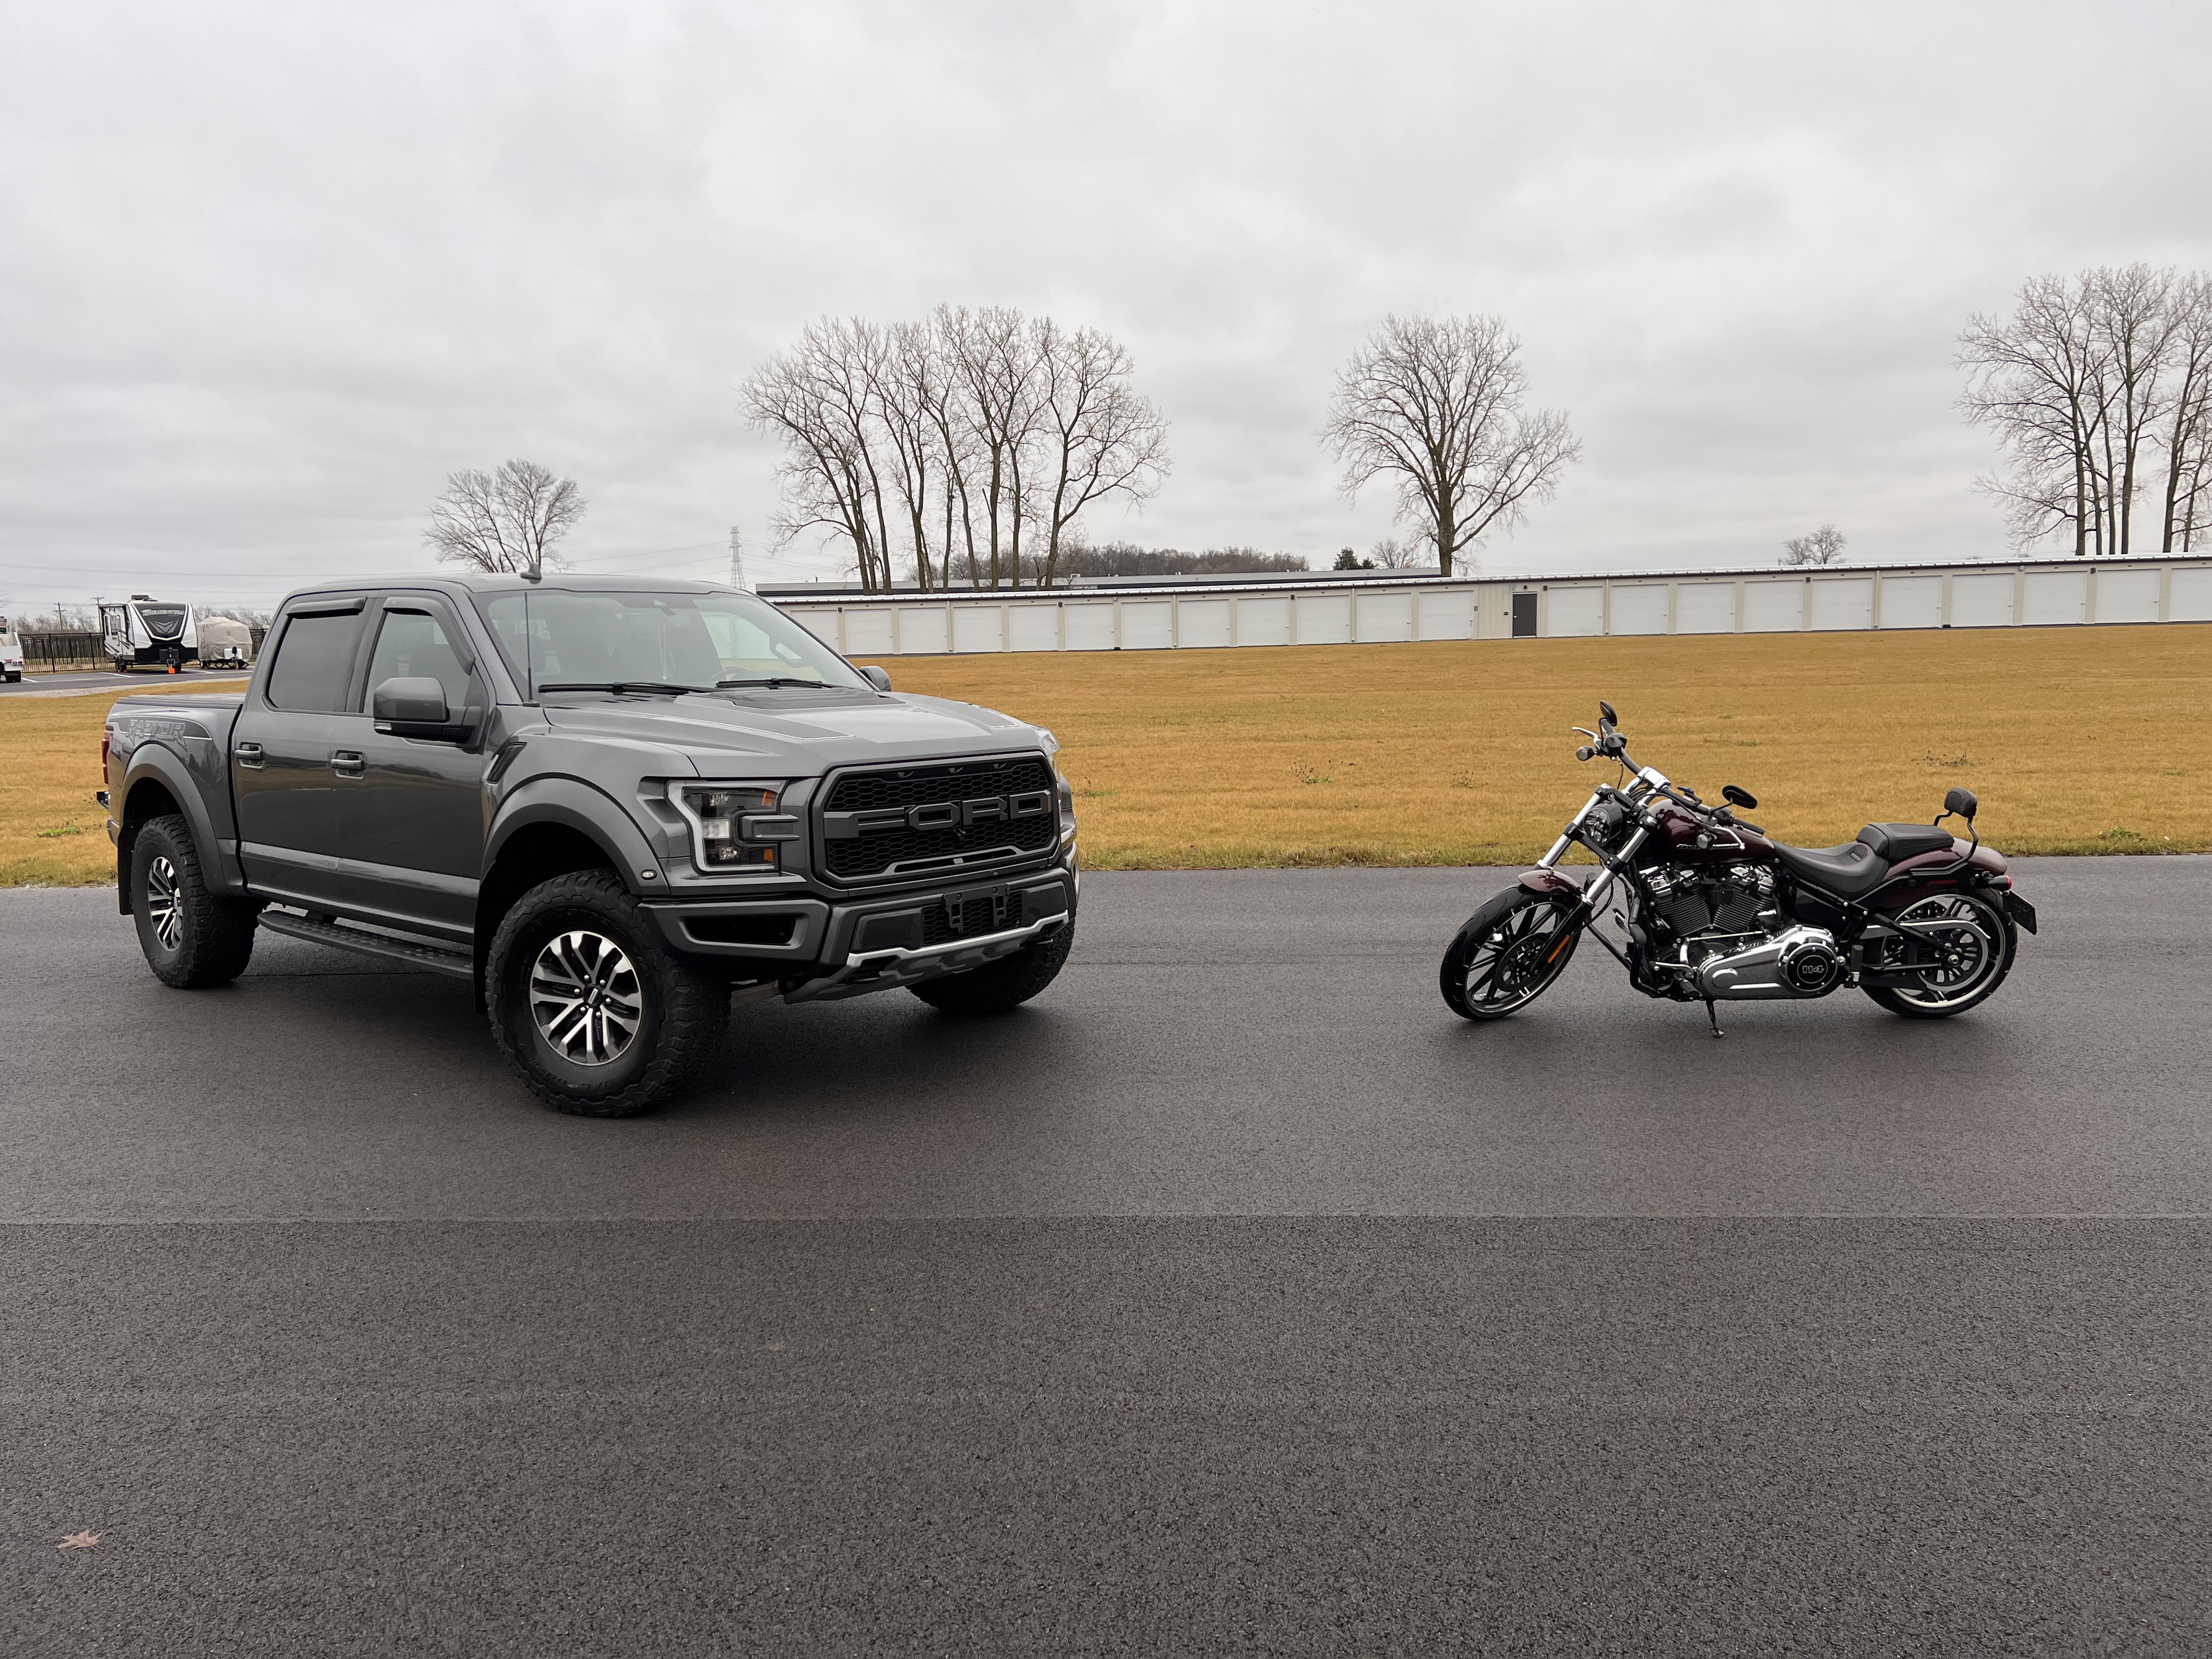 Ford Raptor and Harley Breakout 3